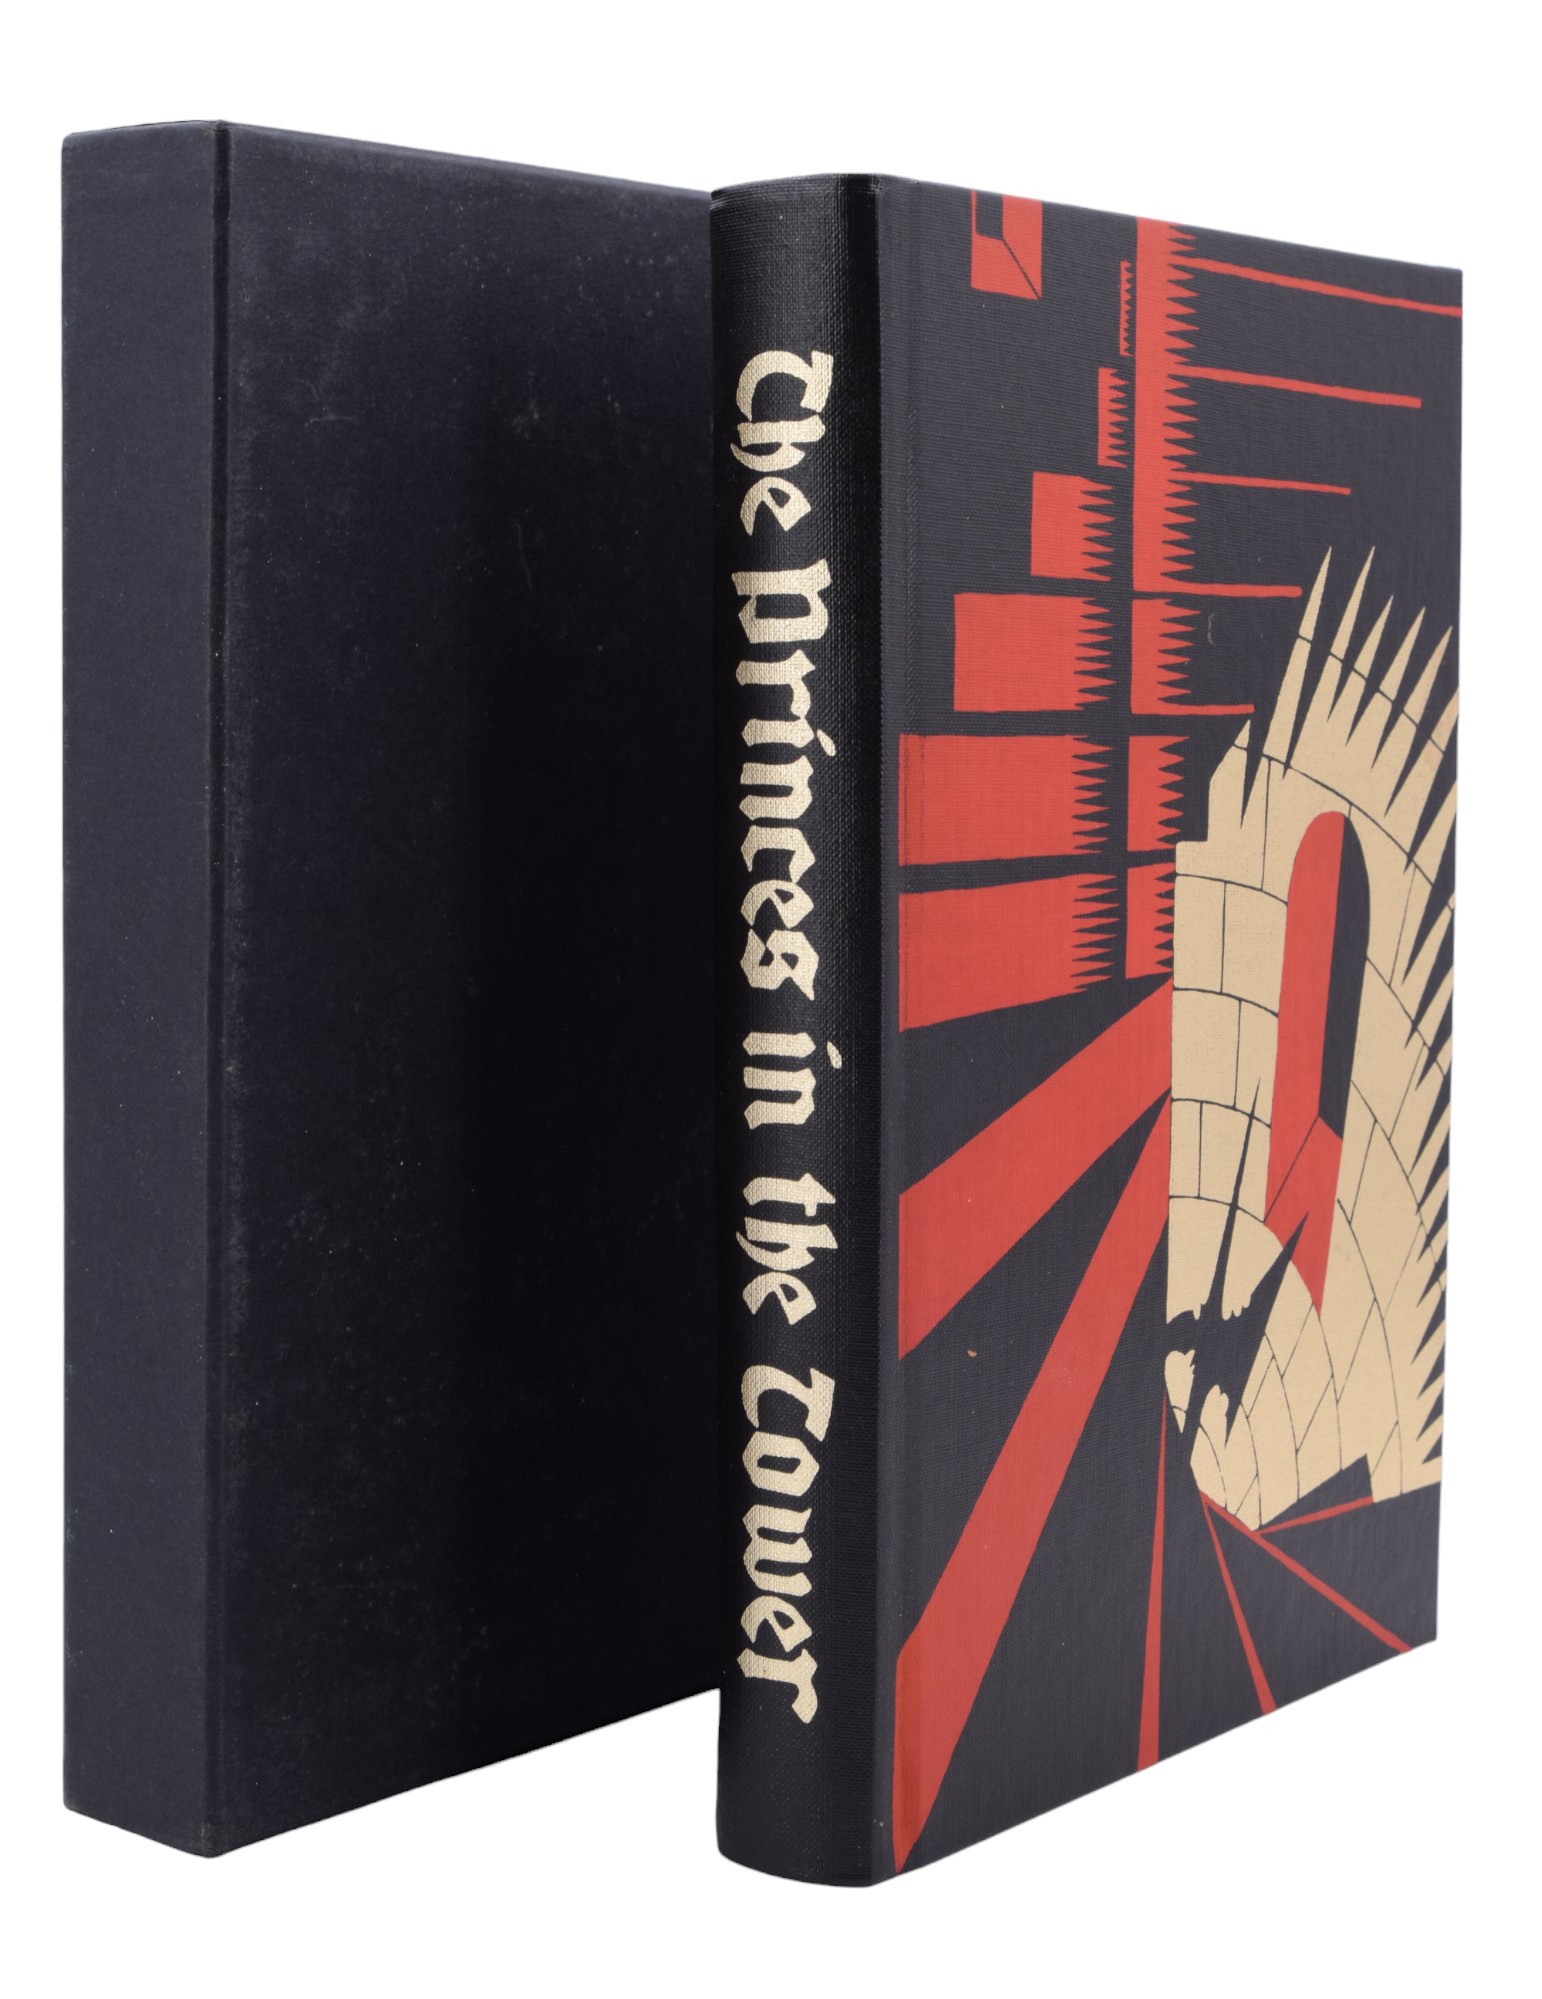 Seven Folio Society publications in slip cases, including Frances Wood, "The Silk Road", 2002; - Image 6 of 31